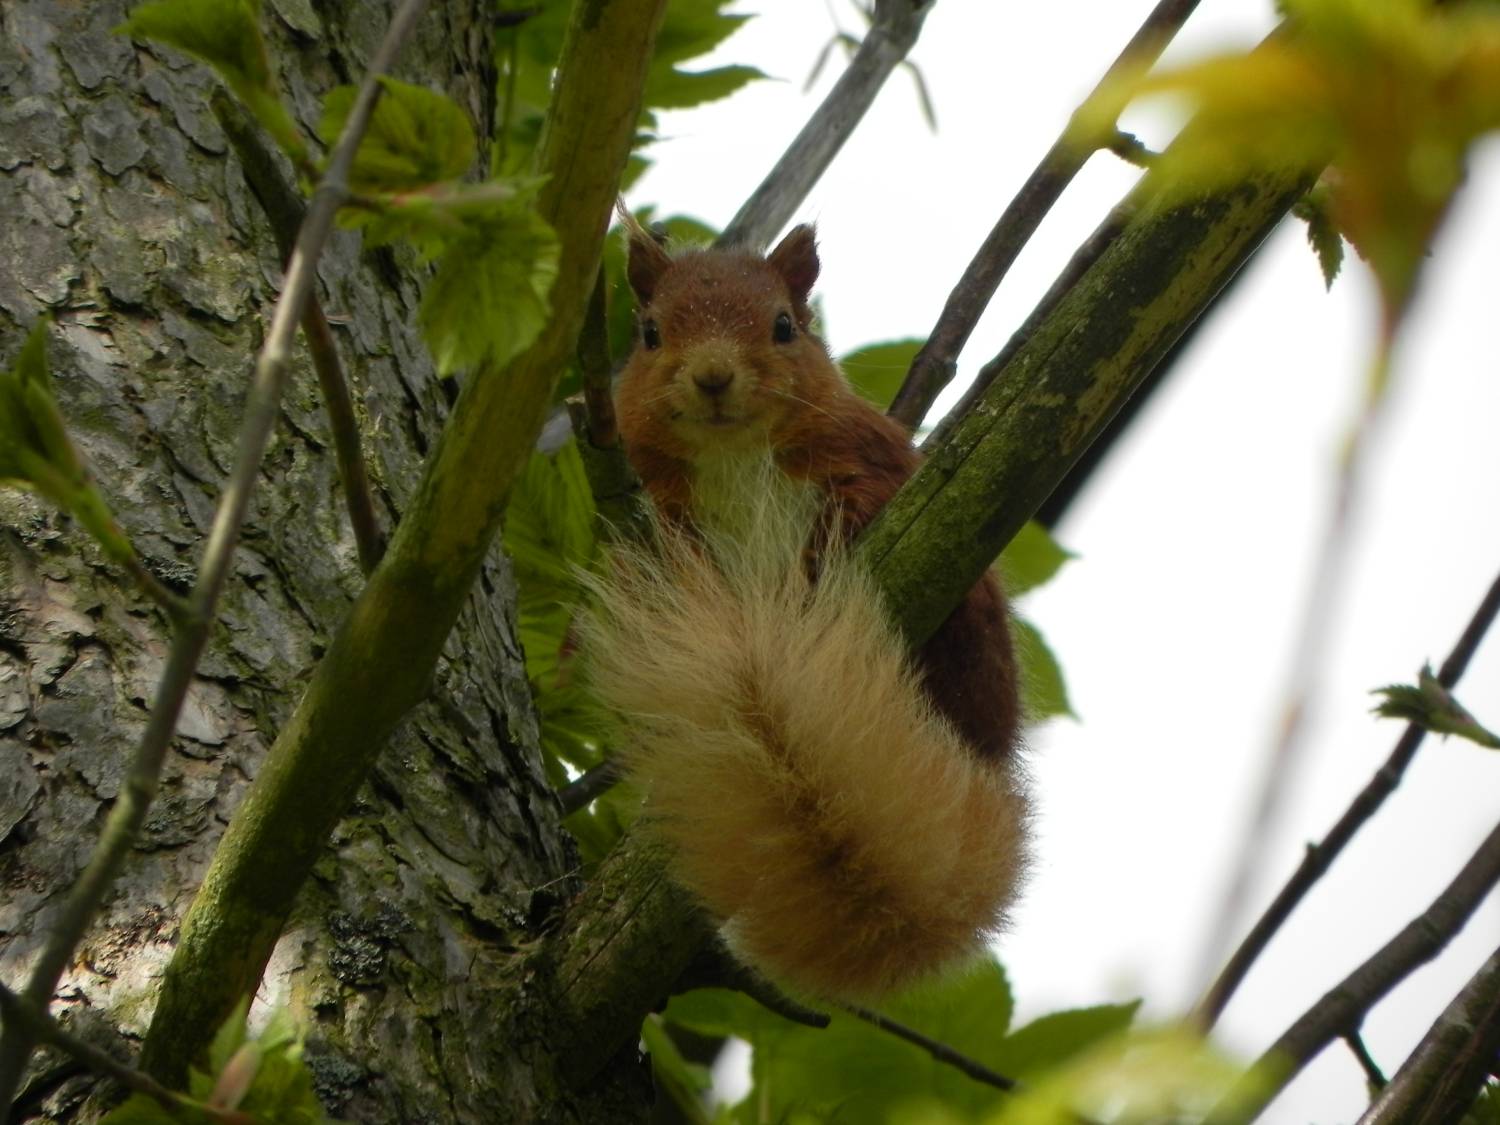 An inquisitive red squirrel